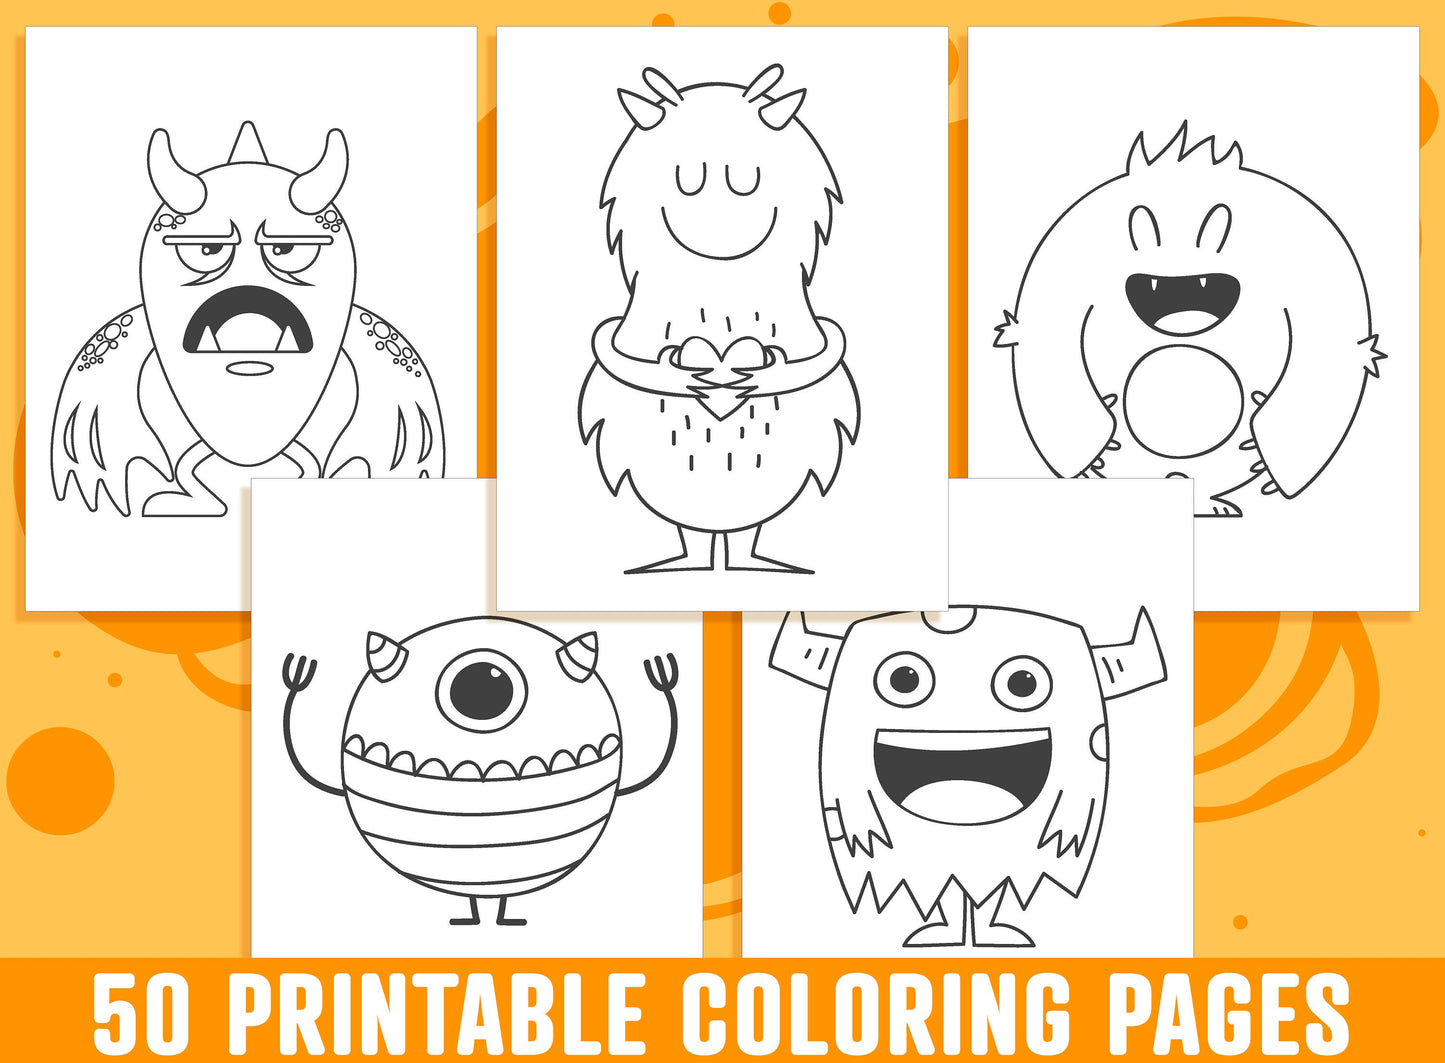 Monster Coloring Pages - 50 Printable Monster Coloring Pages for Kids, Boys, Girls, Teens. Monster Party Activity - Instant Download.